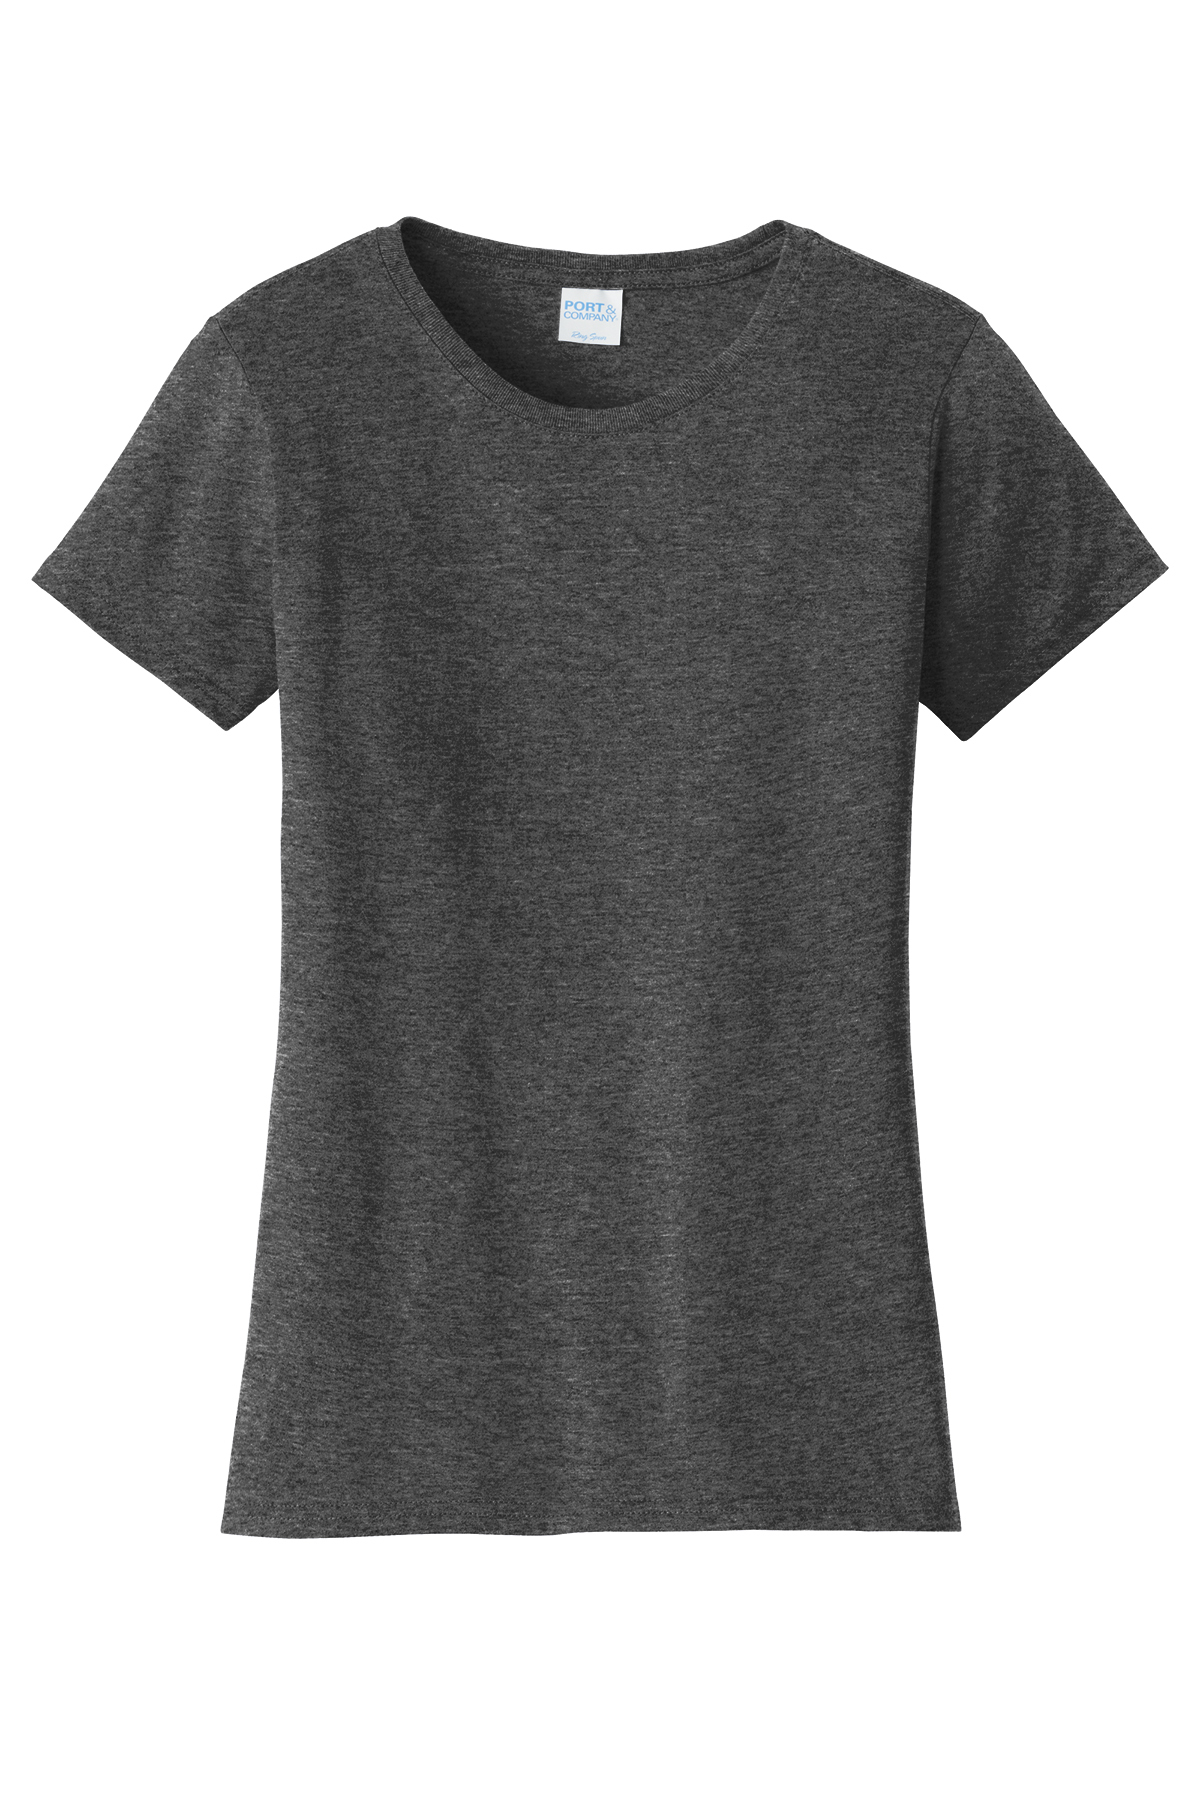 Port & Company<SUP>®</SUP> Ladies Fan Favorite™ Tee | Product 